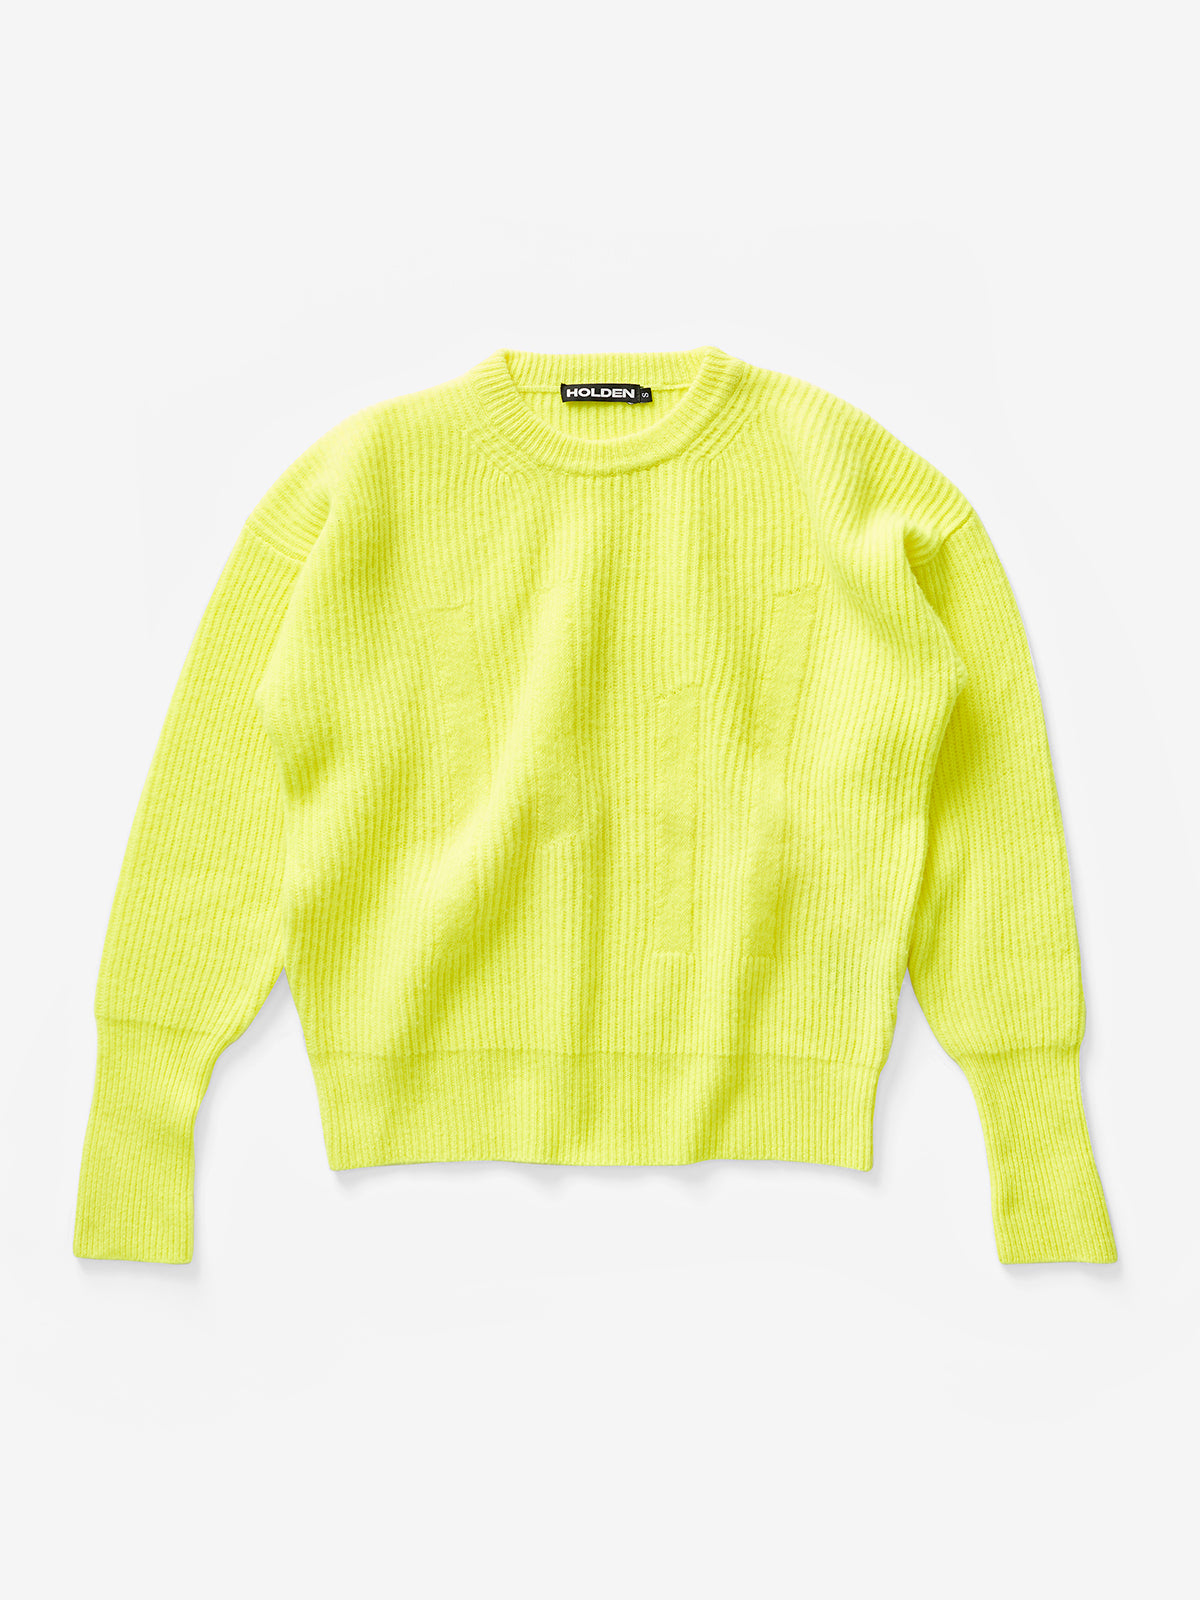 Woman WOOL ICON SWEATER - Mineral Yellow - flat lay - front